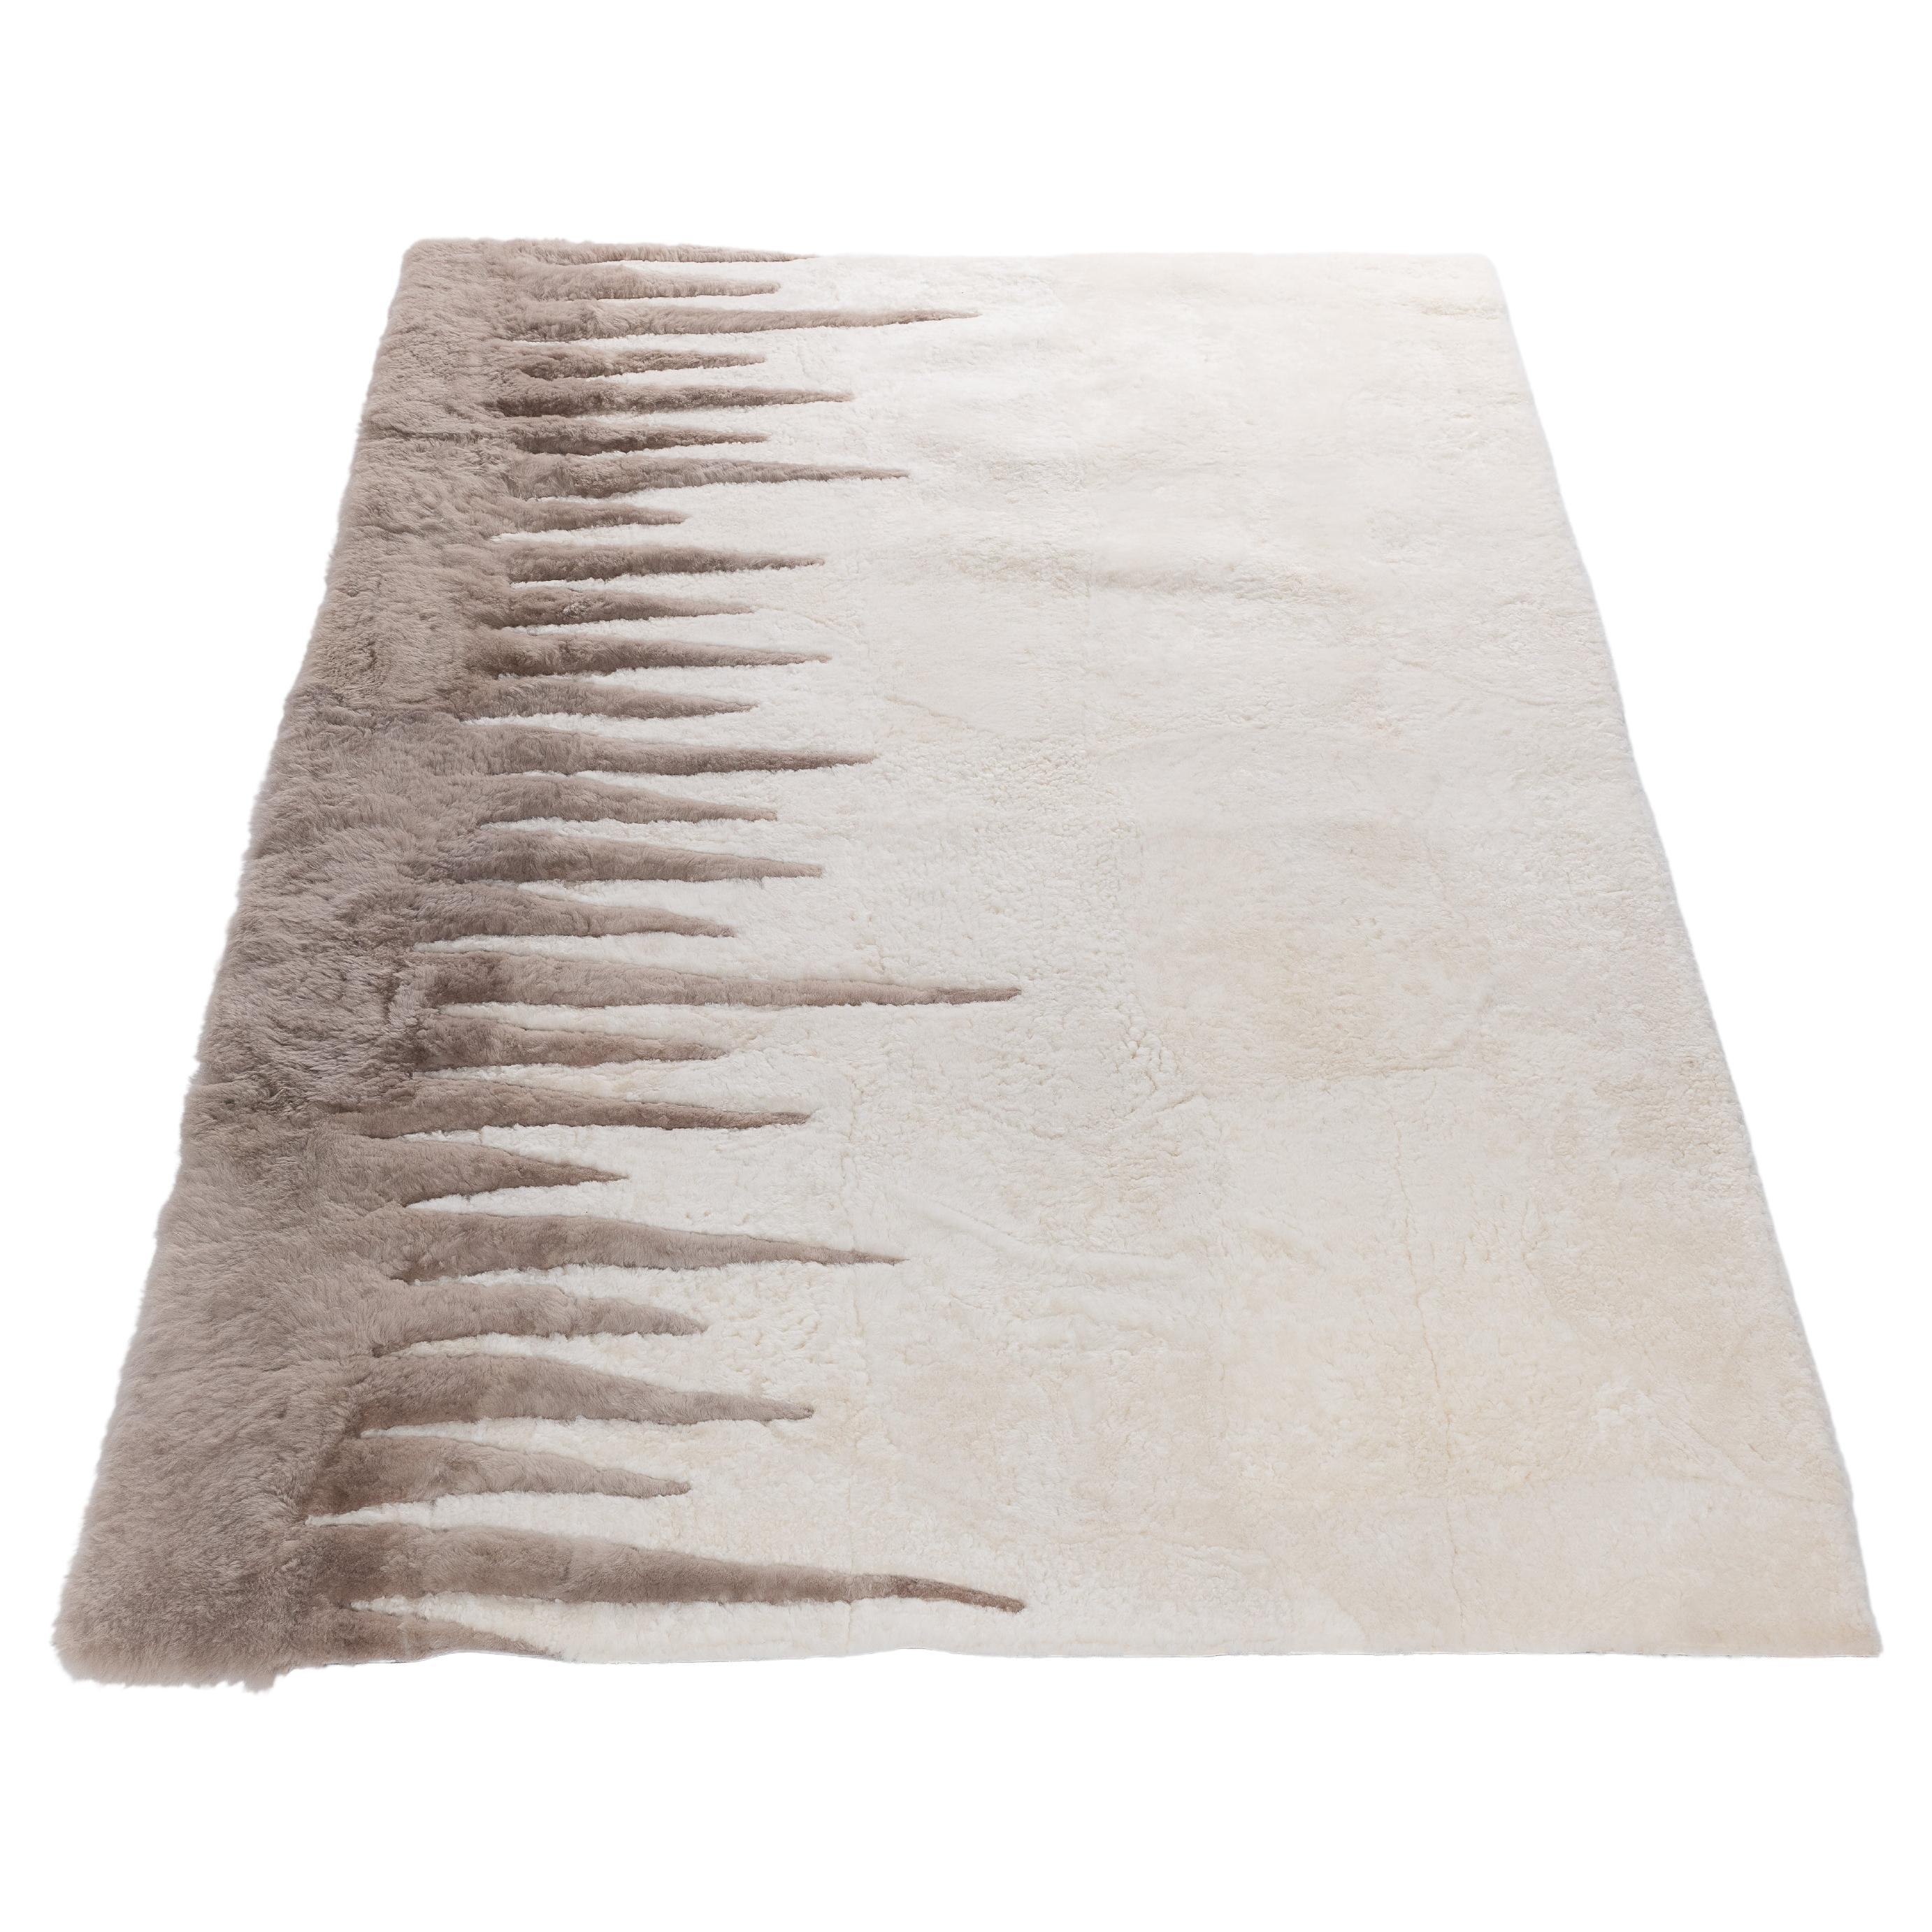 White and Beige Shearling Rug - ICICLE - Handmade in France For Sale